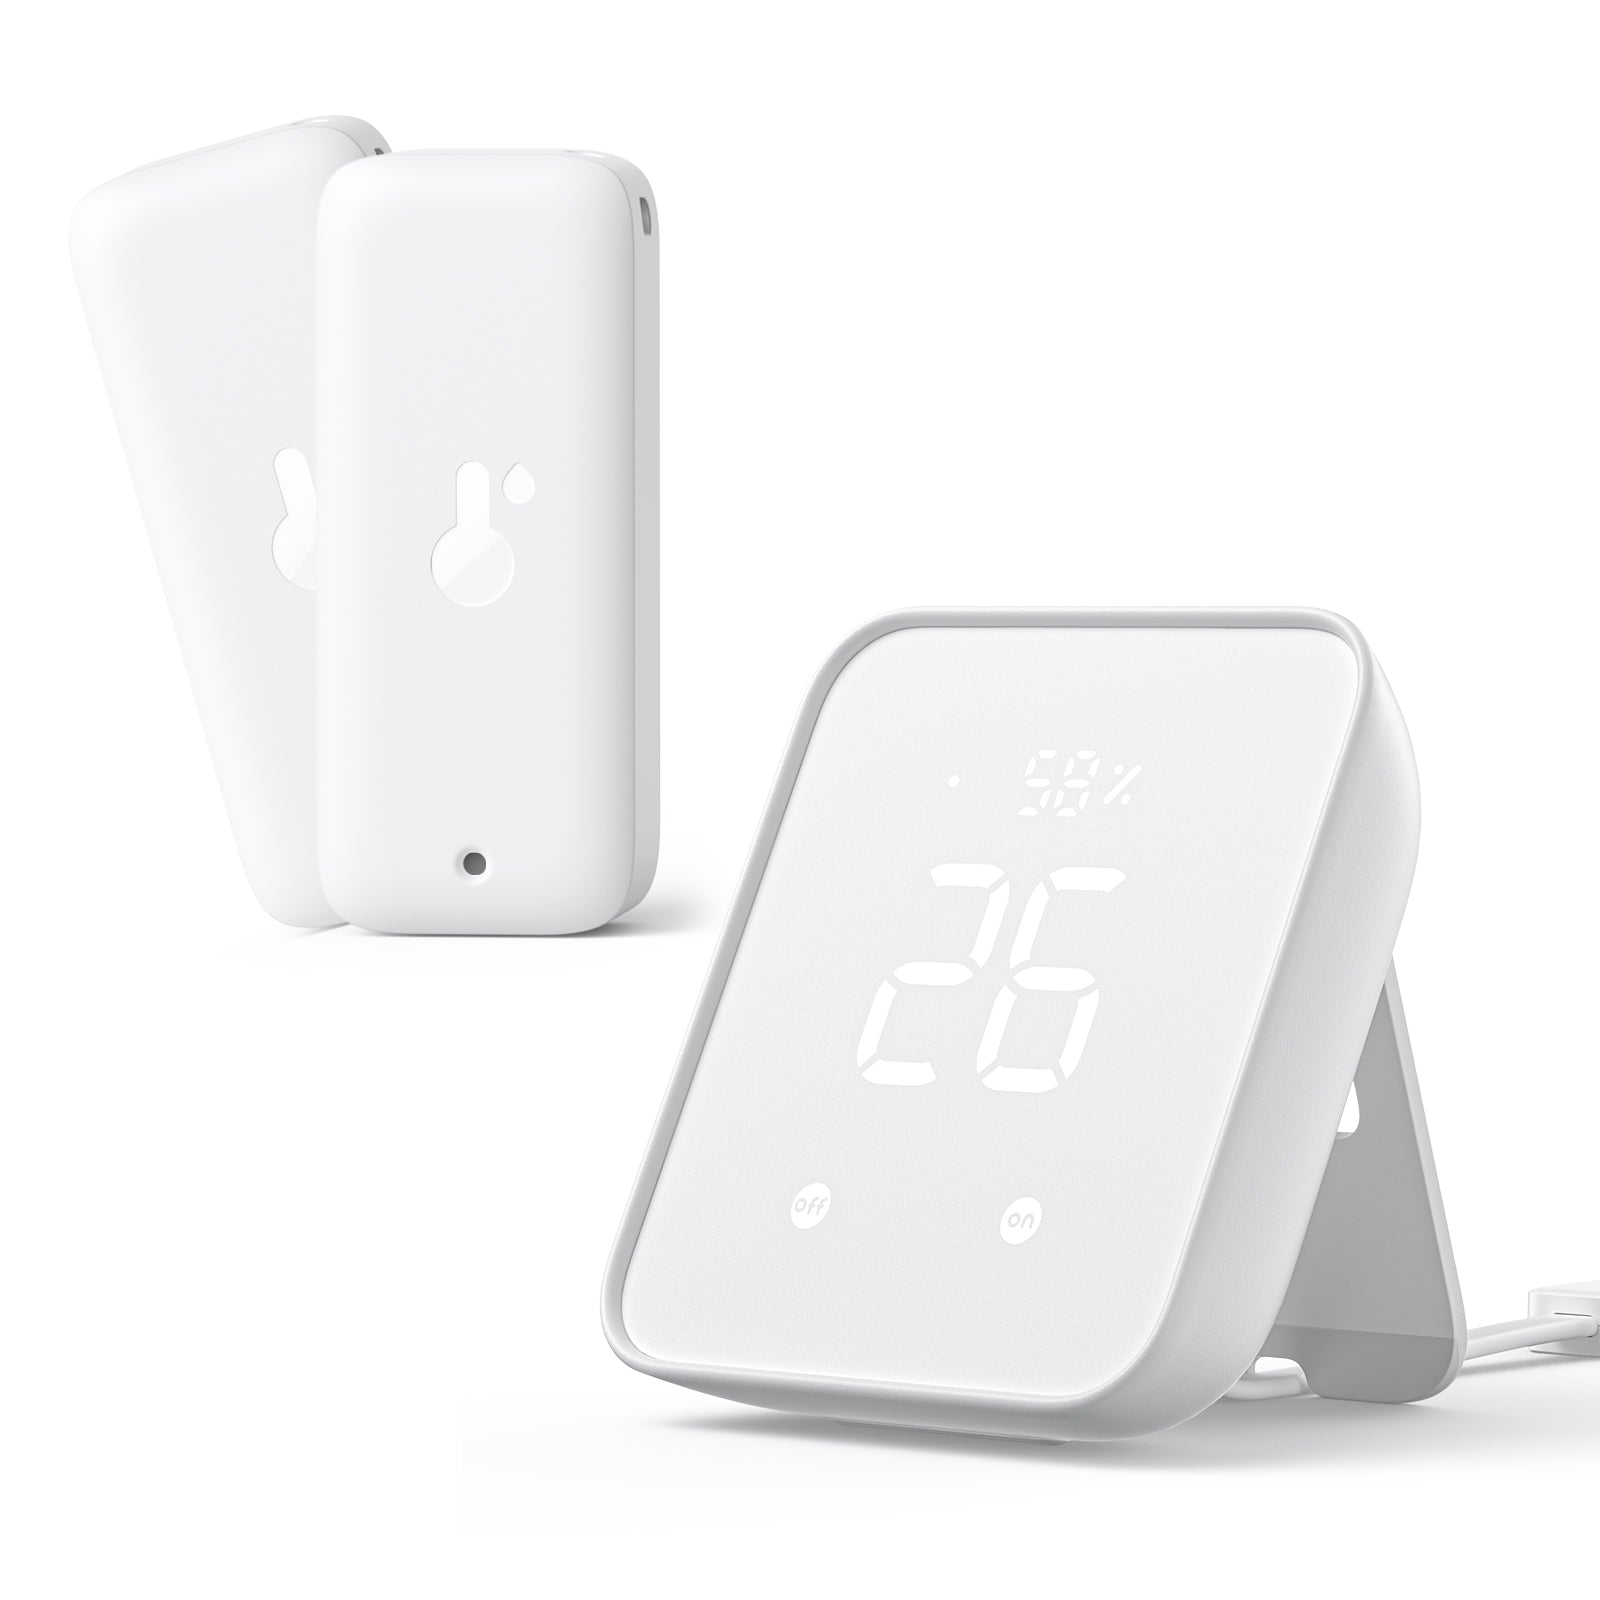 SwitchBot's Matter-compatible smart home hub is finally available